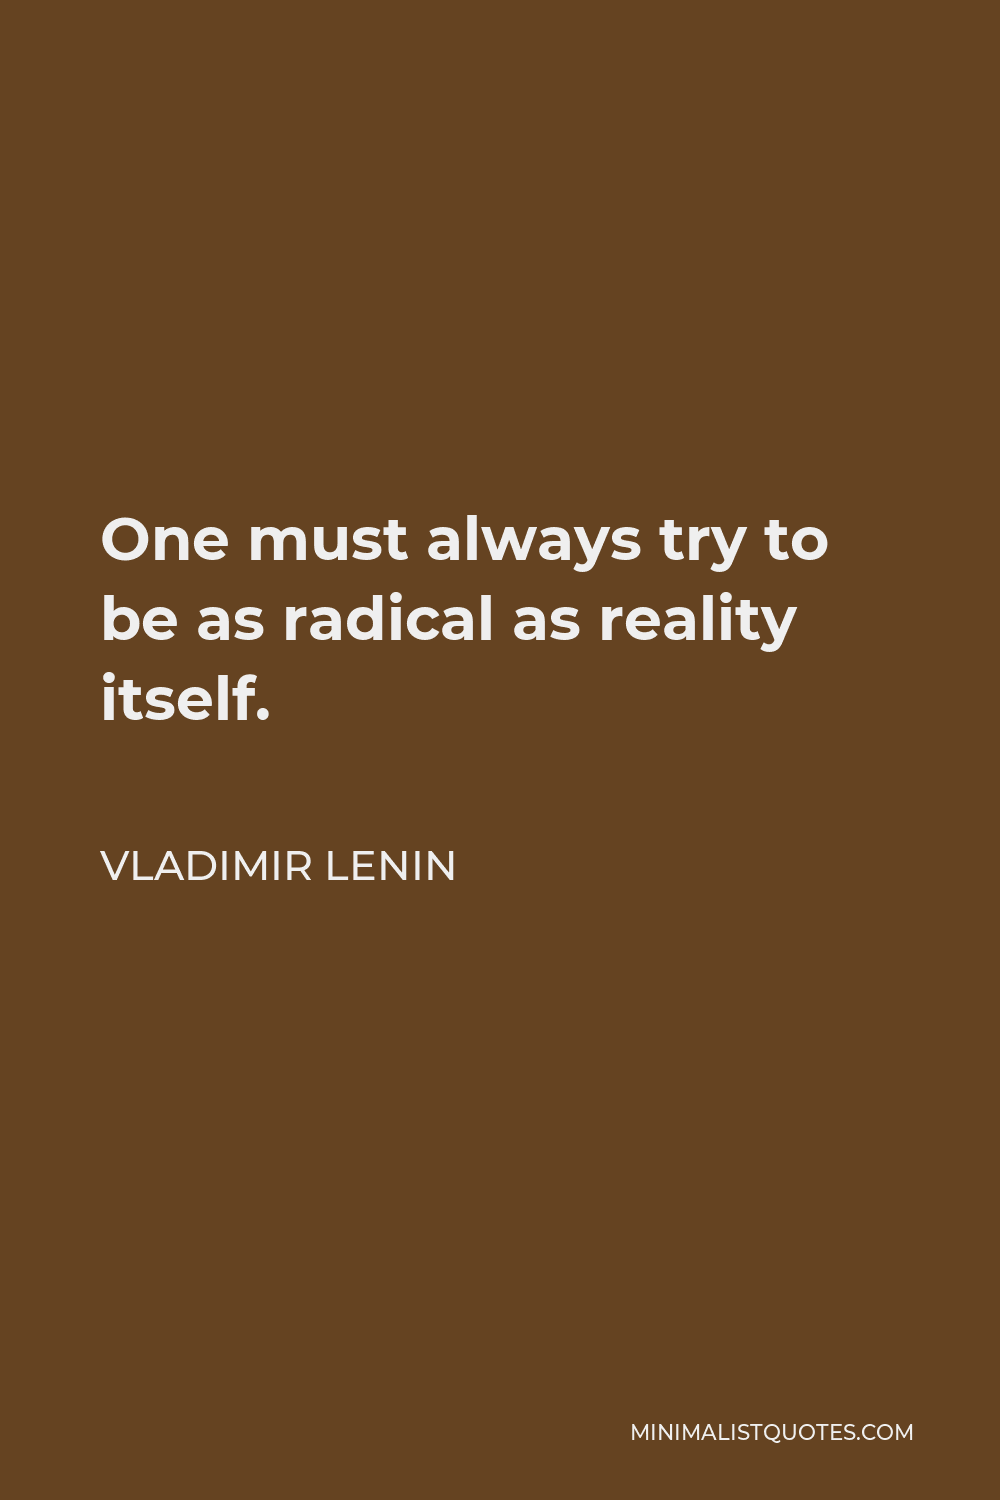 Vladimir Lenin Quote - One must always try to be as radical as reality itself.